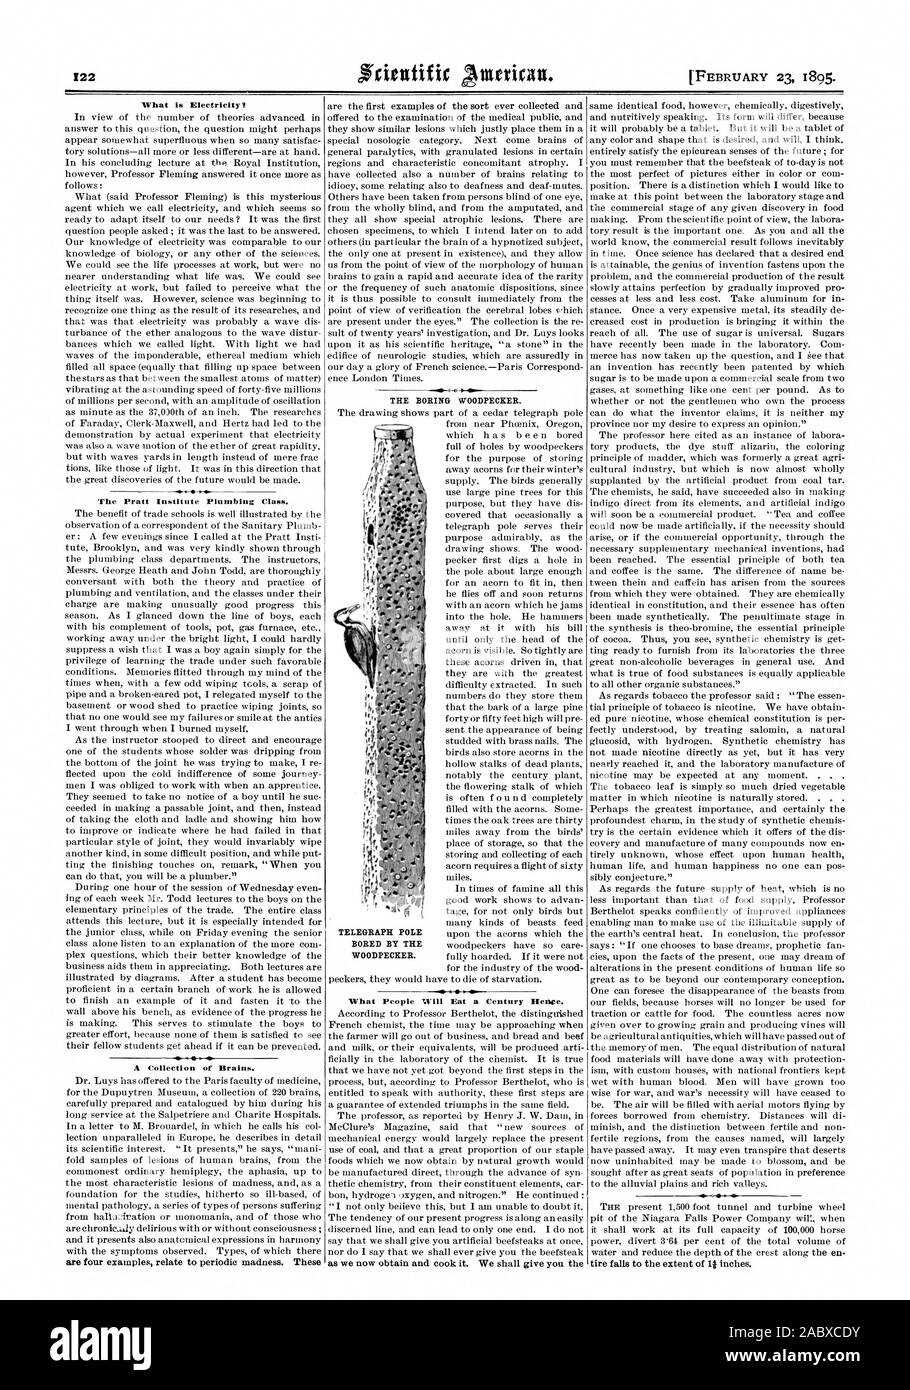 What is Electricity? The Pratt Institute Plumbing Class. A Collection of Brains. THE BORING WOODPECKER. TELEGRAPH POLE BORED BY THE WOODPECKER., scientific american, 1895-02-23 Stock Photo